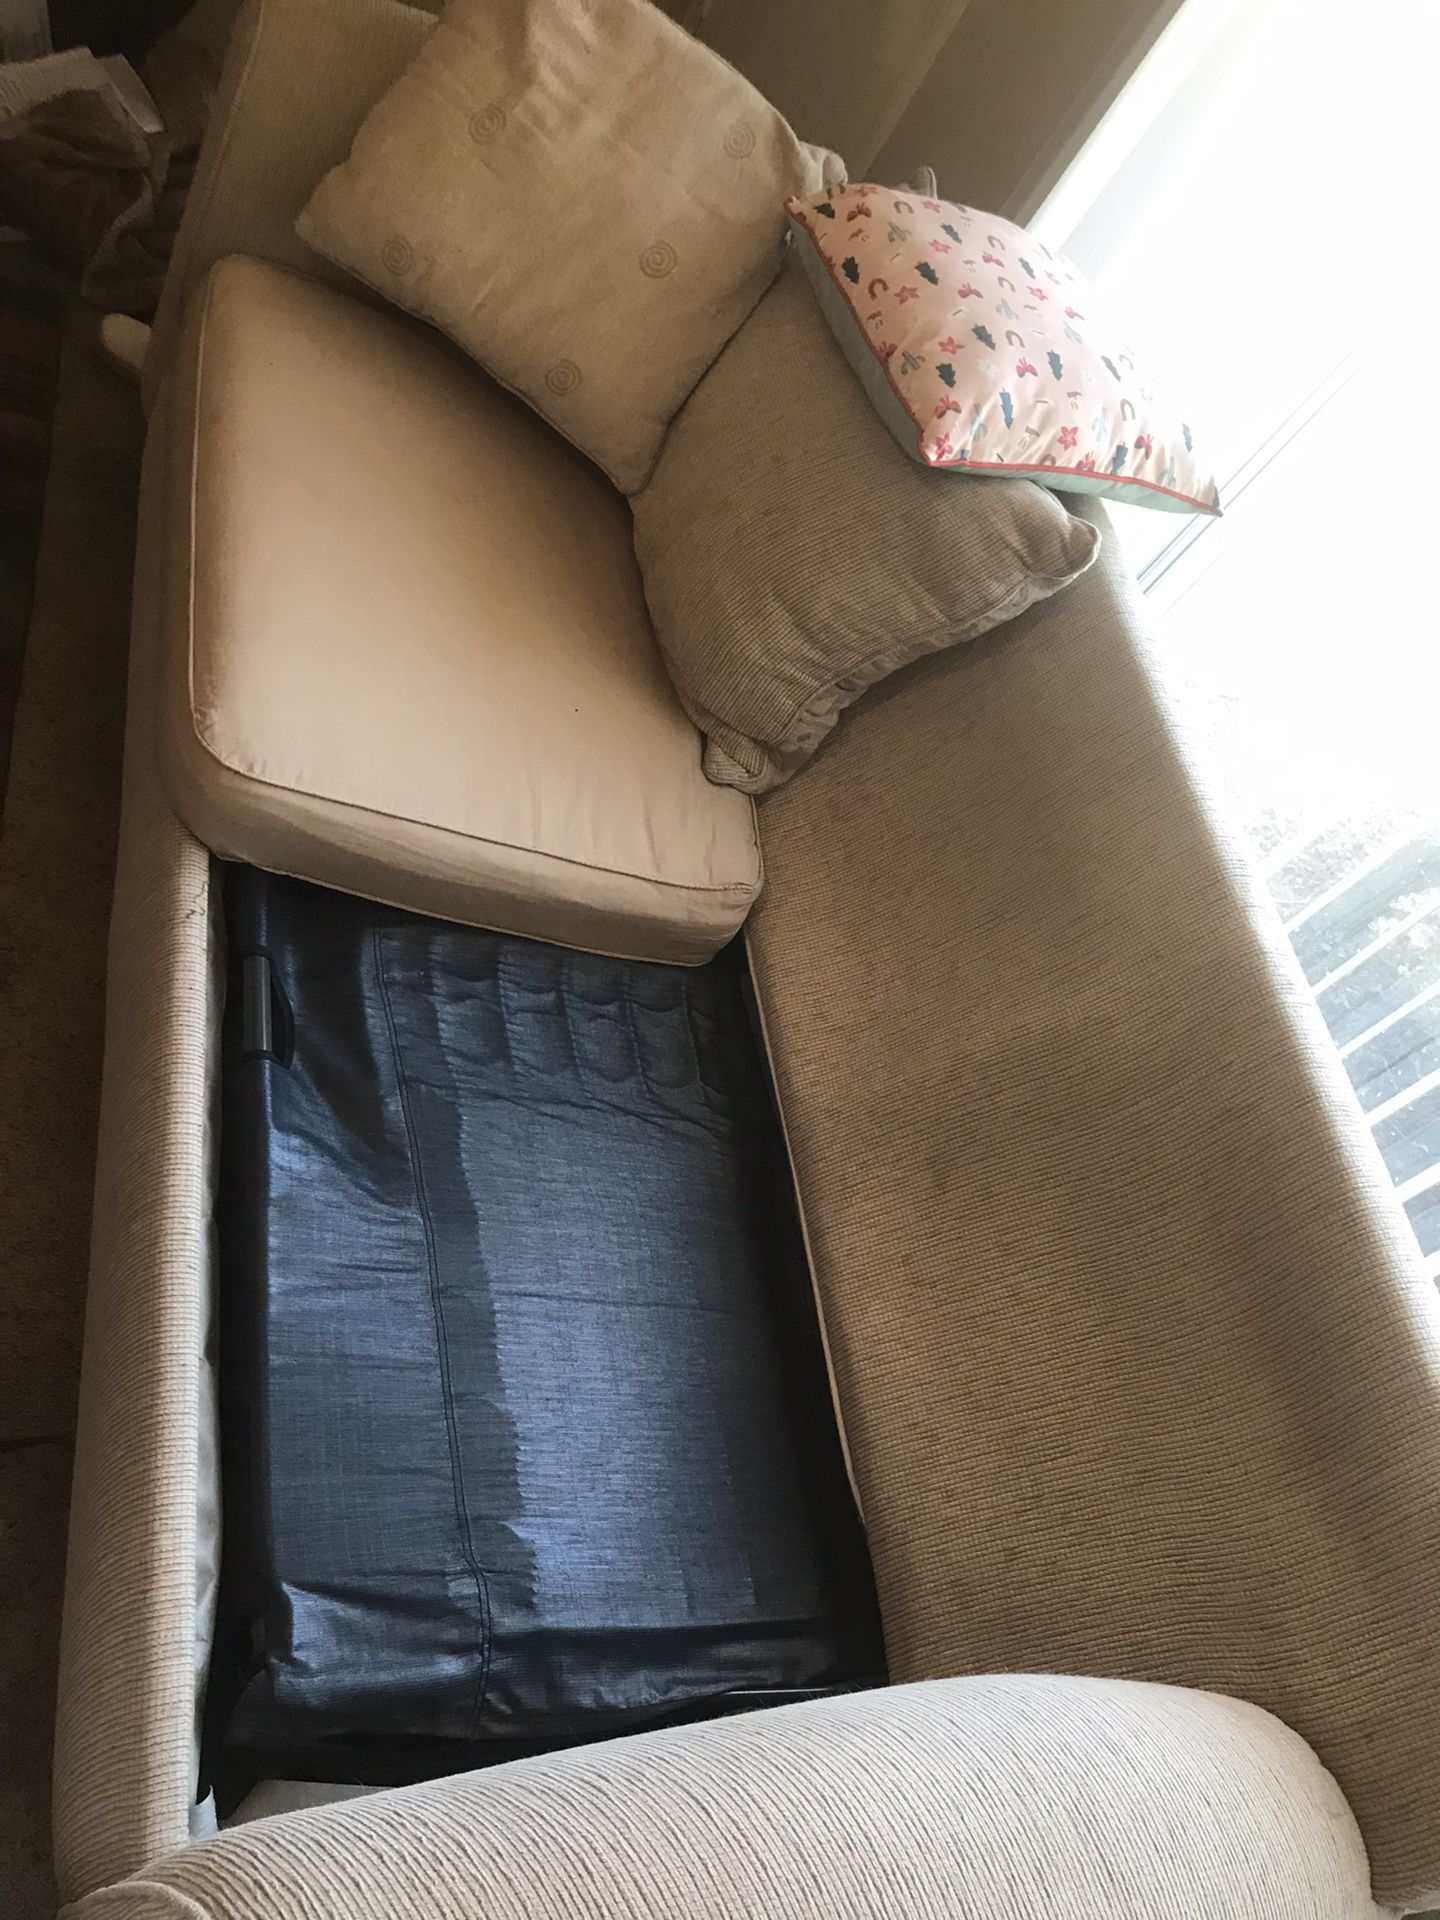 Couch Bed Barely Used 